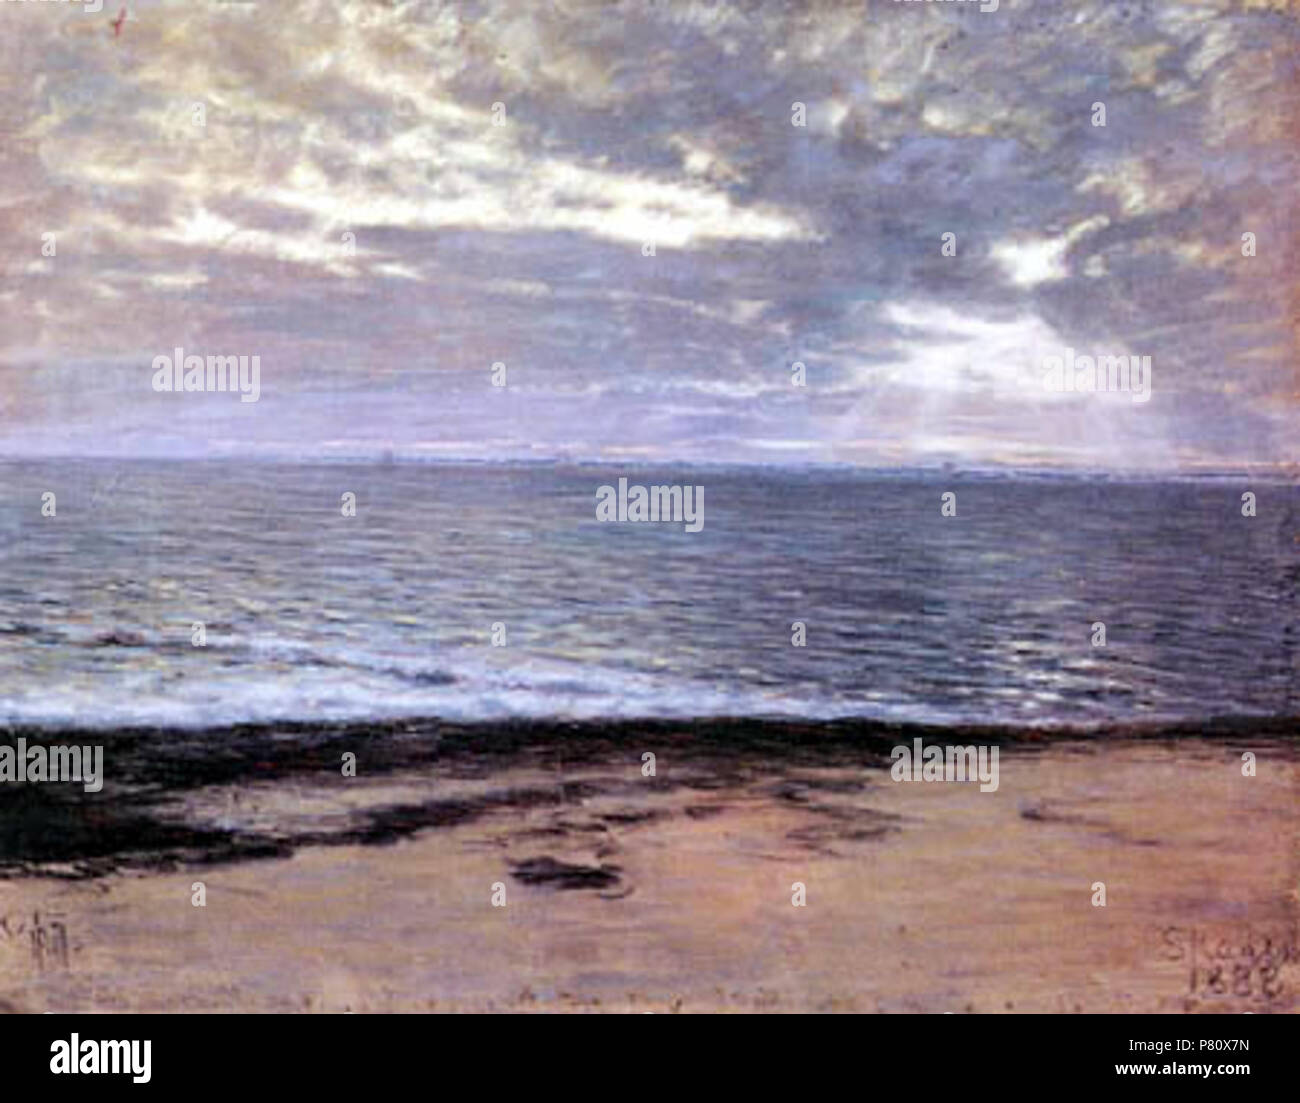 N/A. N/A 373 Thorvald Niss morgens am strand Stock Photo